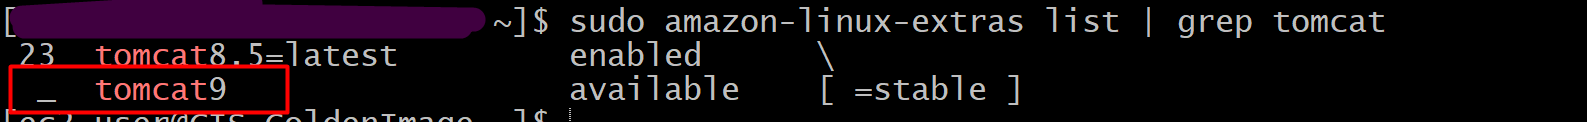 the result of checking the amazon extra repos